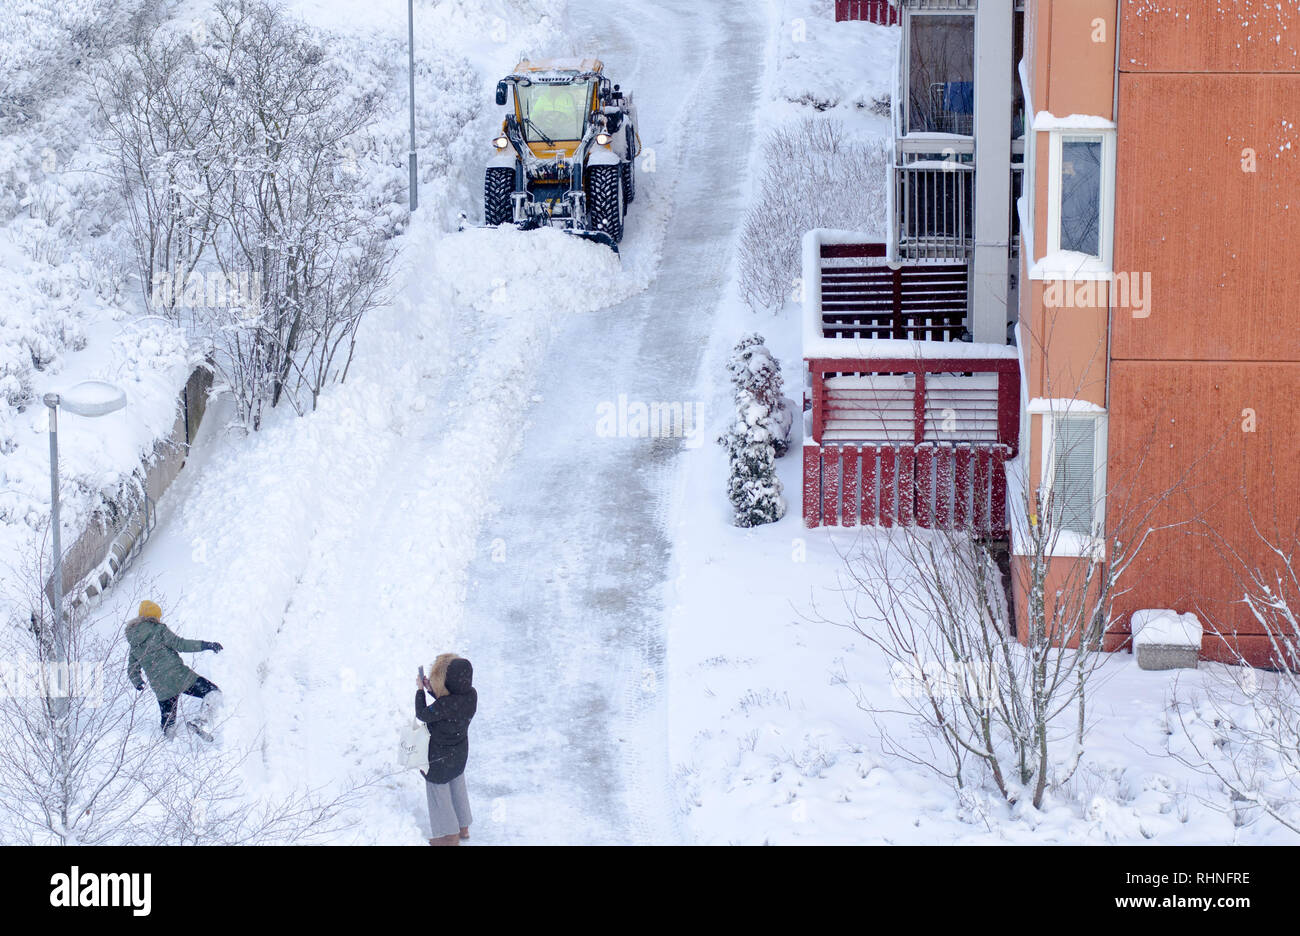 Stockholm, Sweden. 3 February 2019. Plowing beeing done after heavy snowing in northern Stockholm, Sweden Credit: Jari Juntunen/Alamy Live News Stock Photo